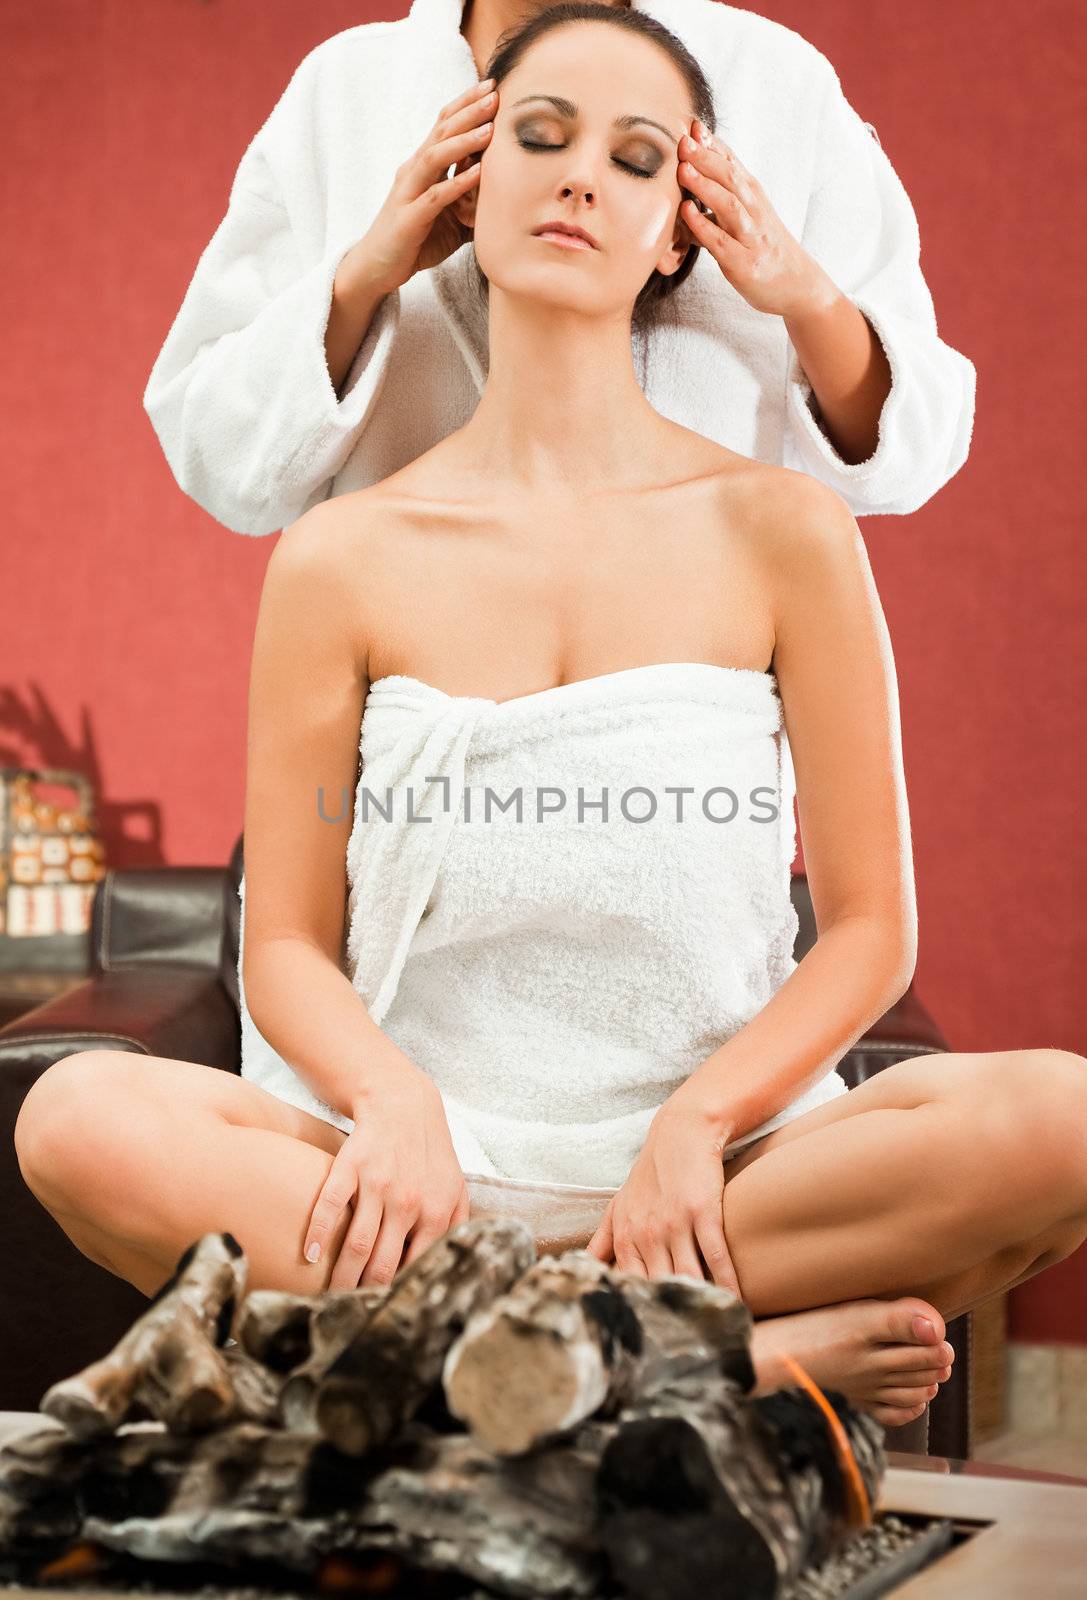 Young female sitting with legs crossed behind fireplace, receiving facial massage